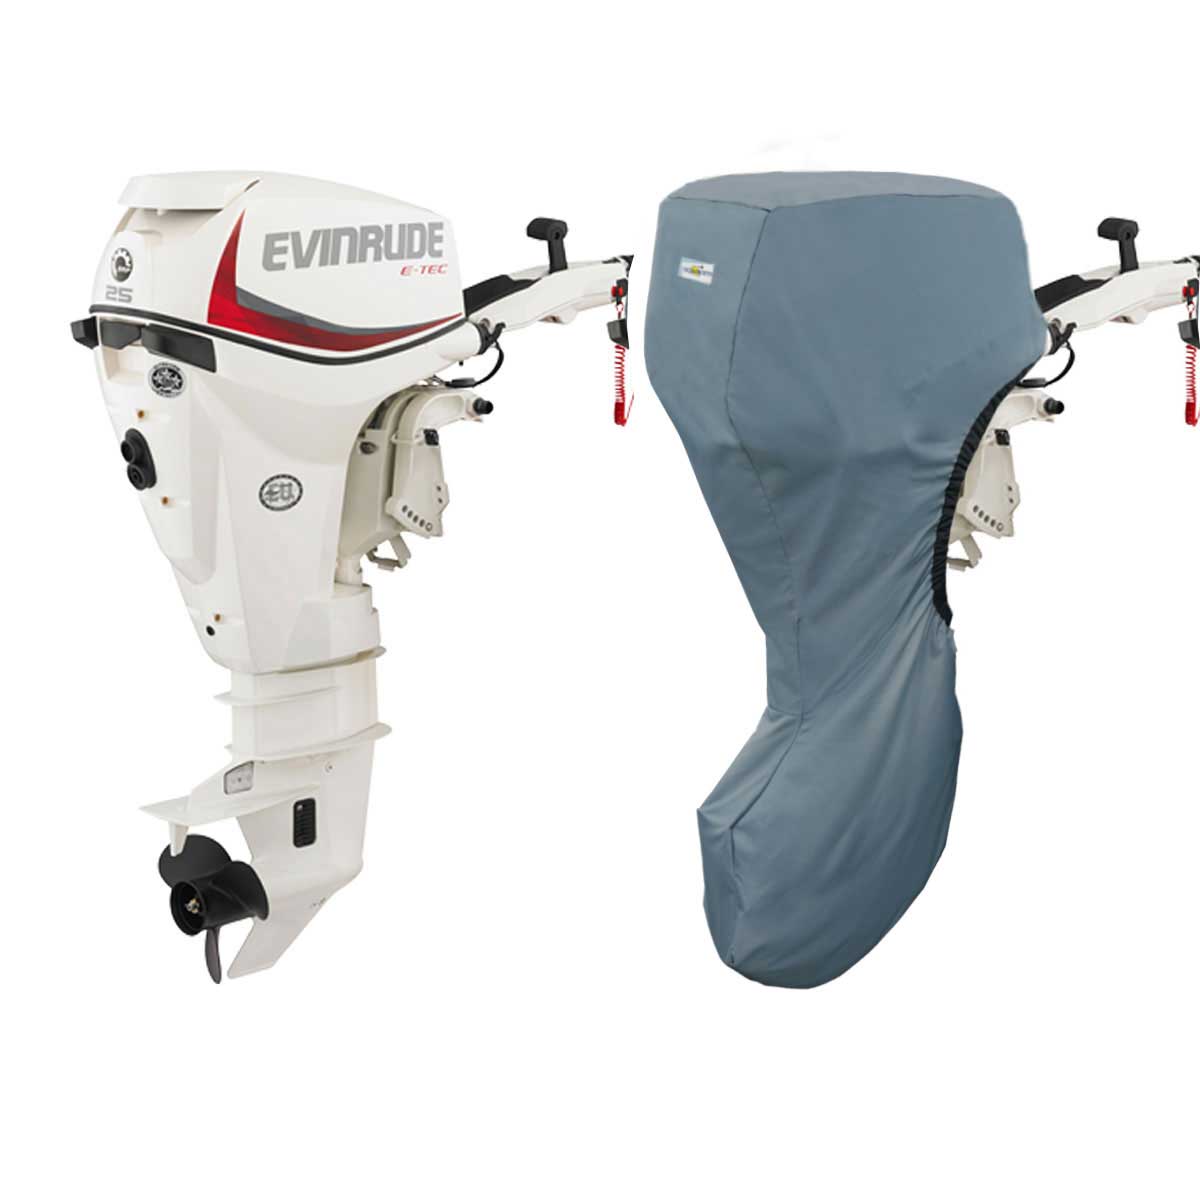 Full Covers for Evinrude